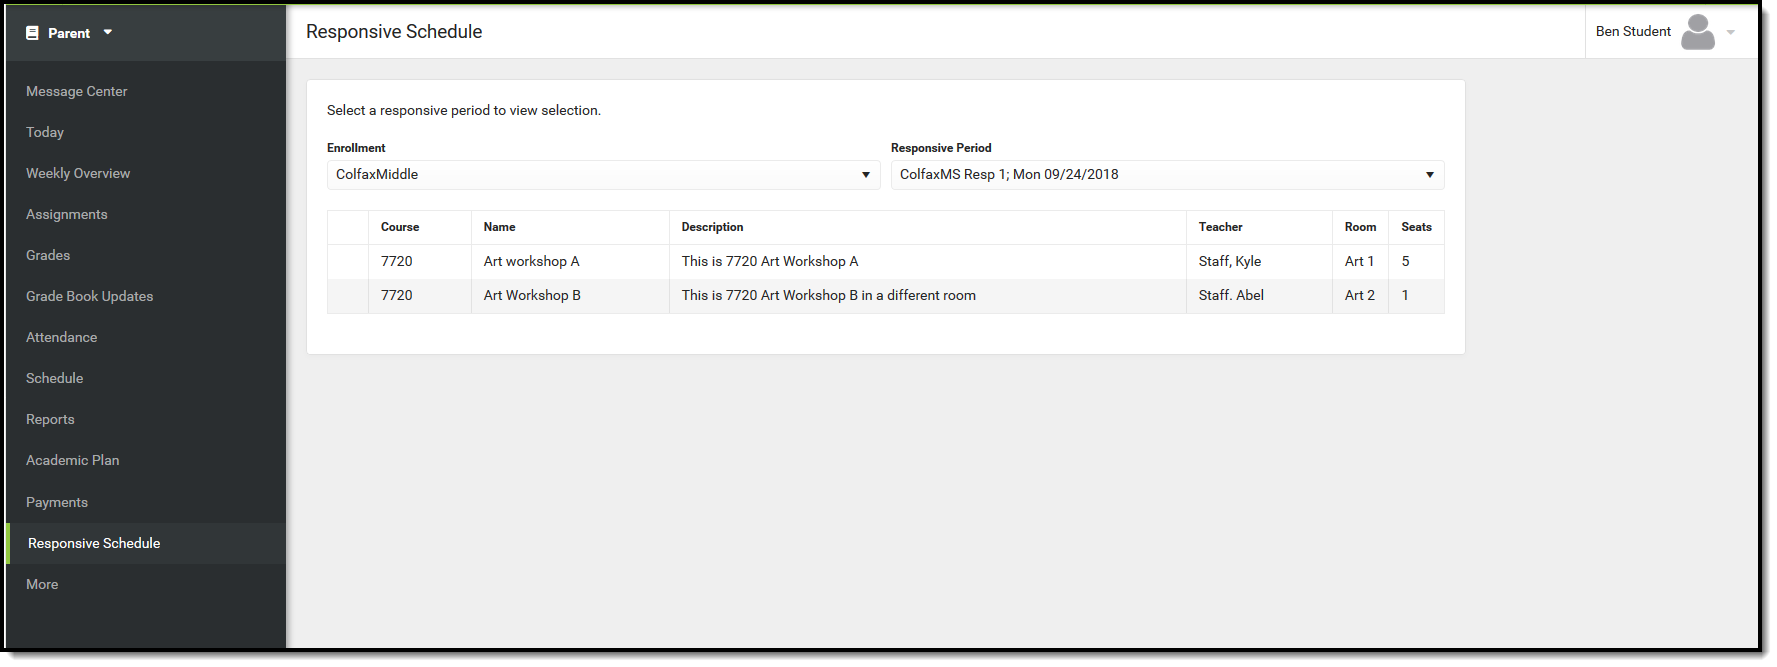 Screenshot of the student request responsive schedule view.